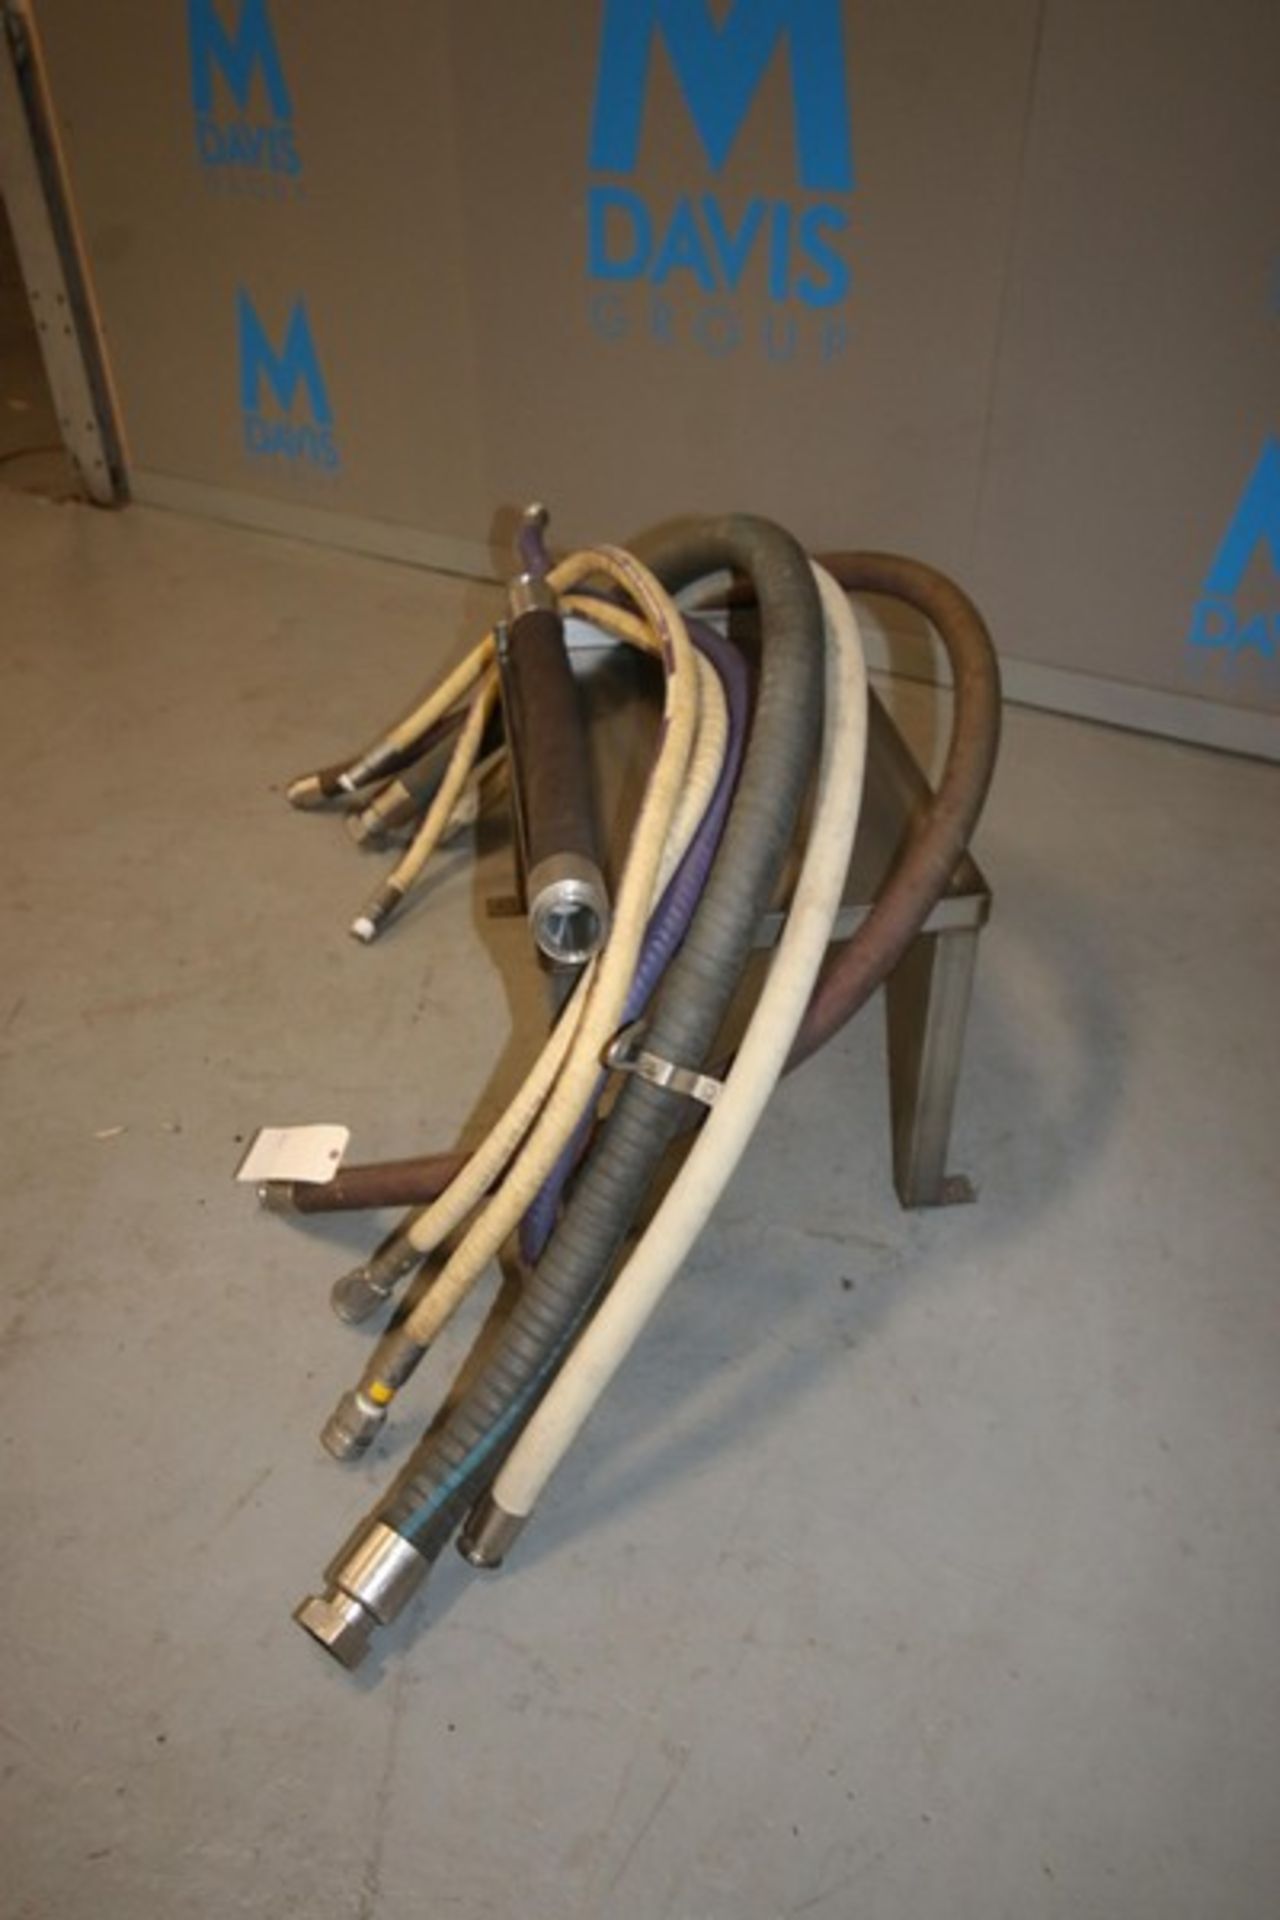 Assorted Transfer Hoses, Length Ranging FromAprox. 35" L - 125" L, Clamp Type, Insert Type, and - Image 3 of 7